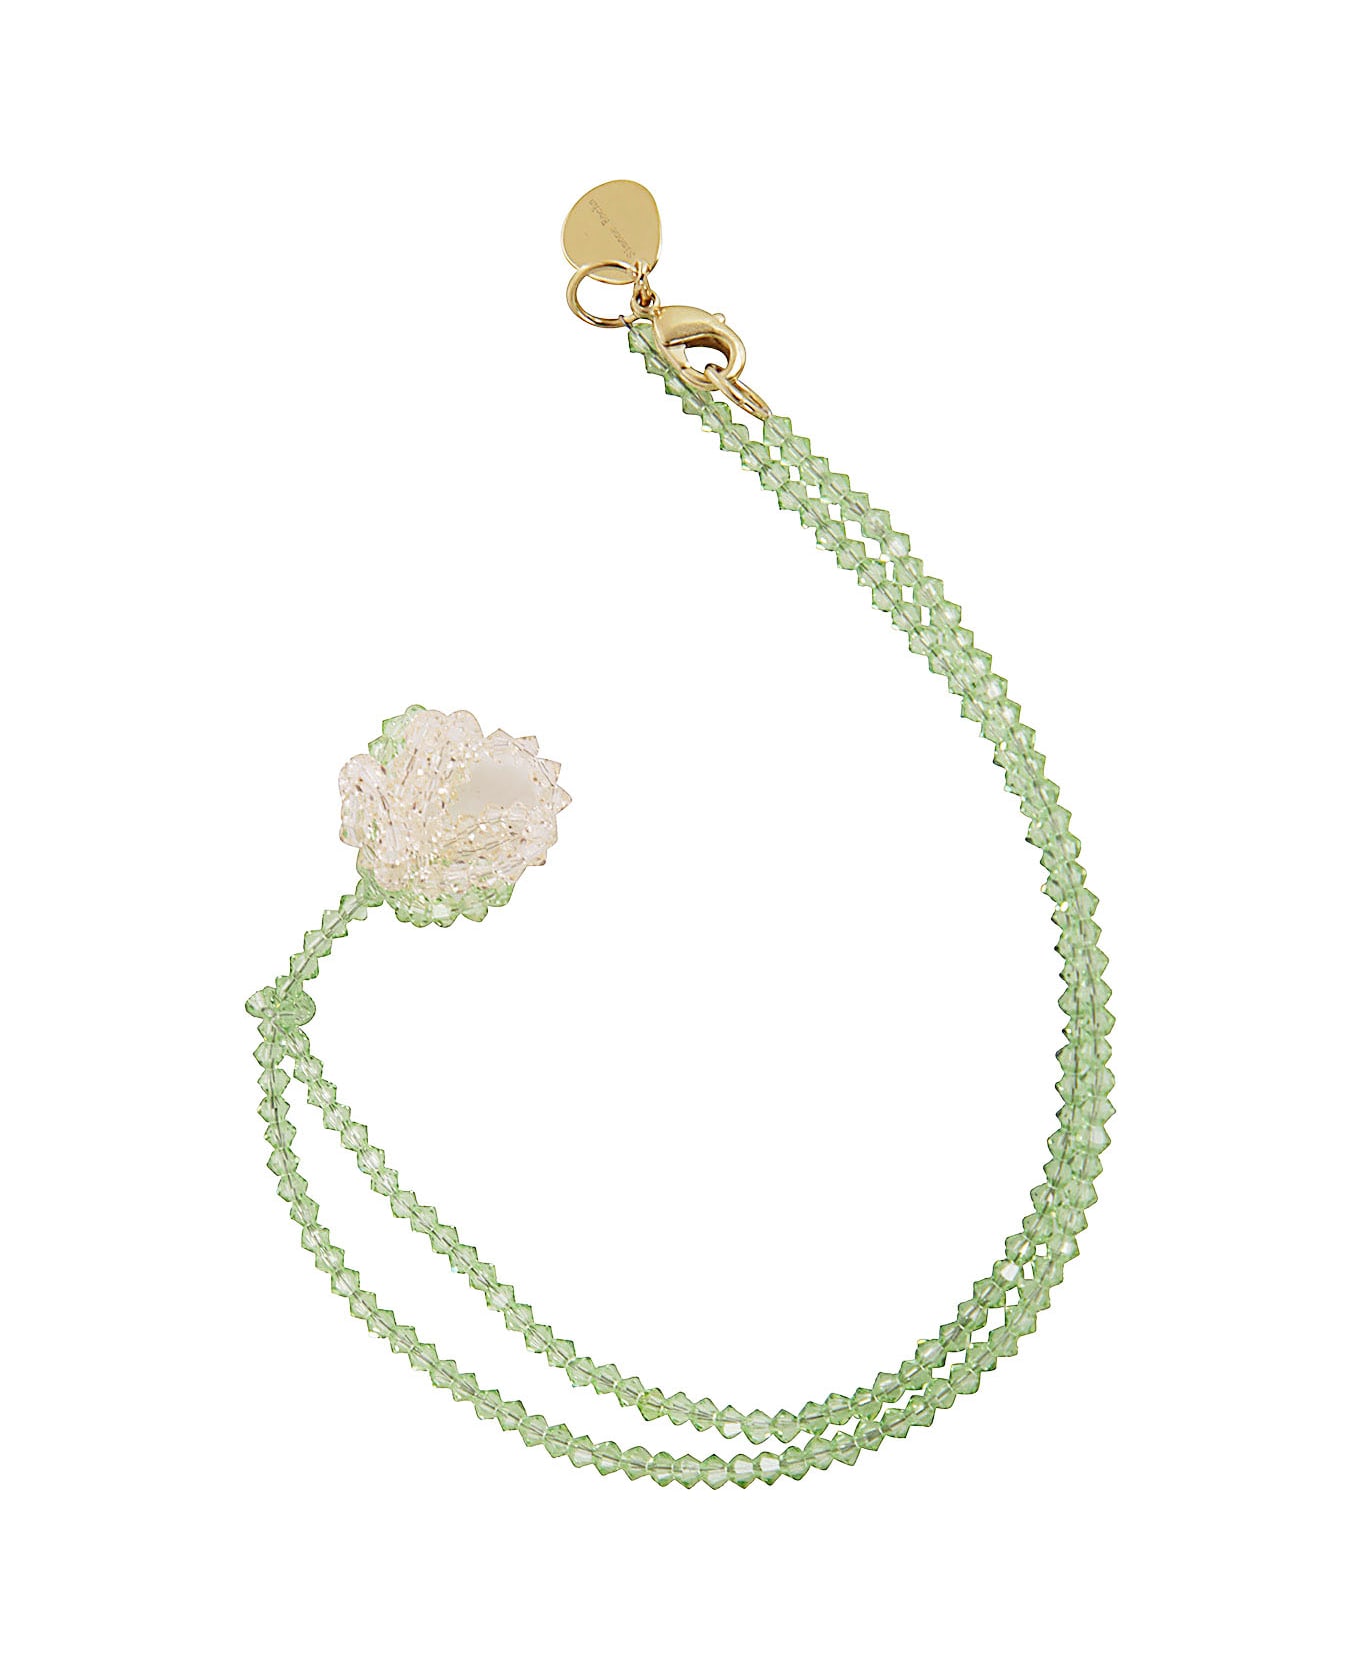 Simone Rocha Cluster Crystal Flower Necklace - Nude Mint